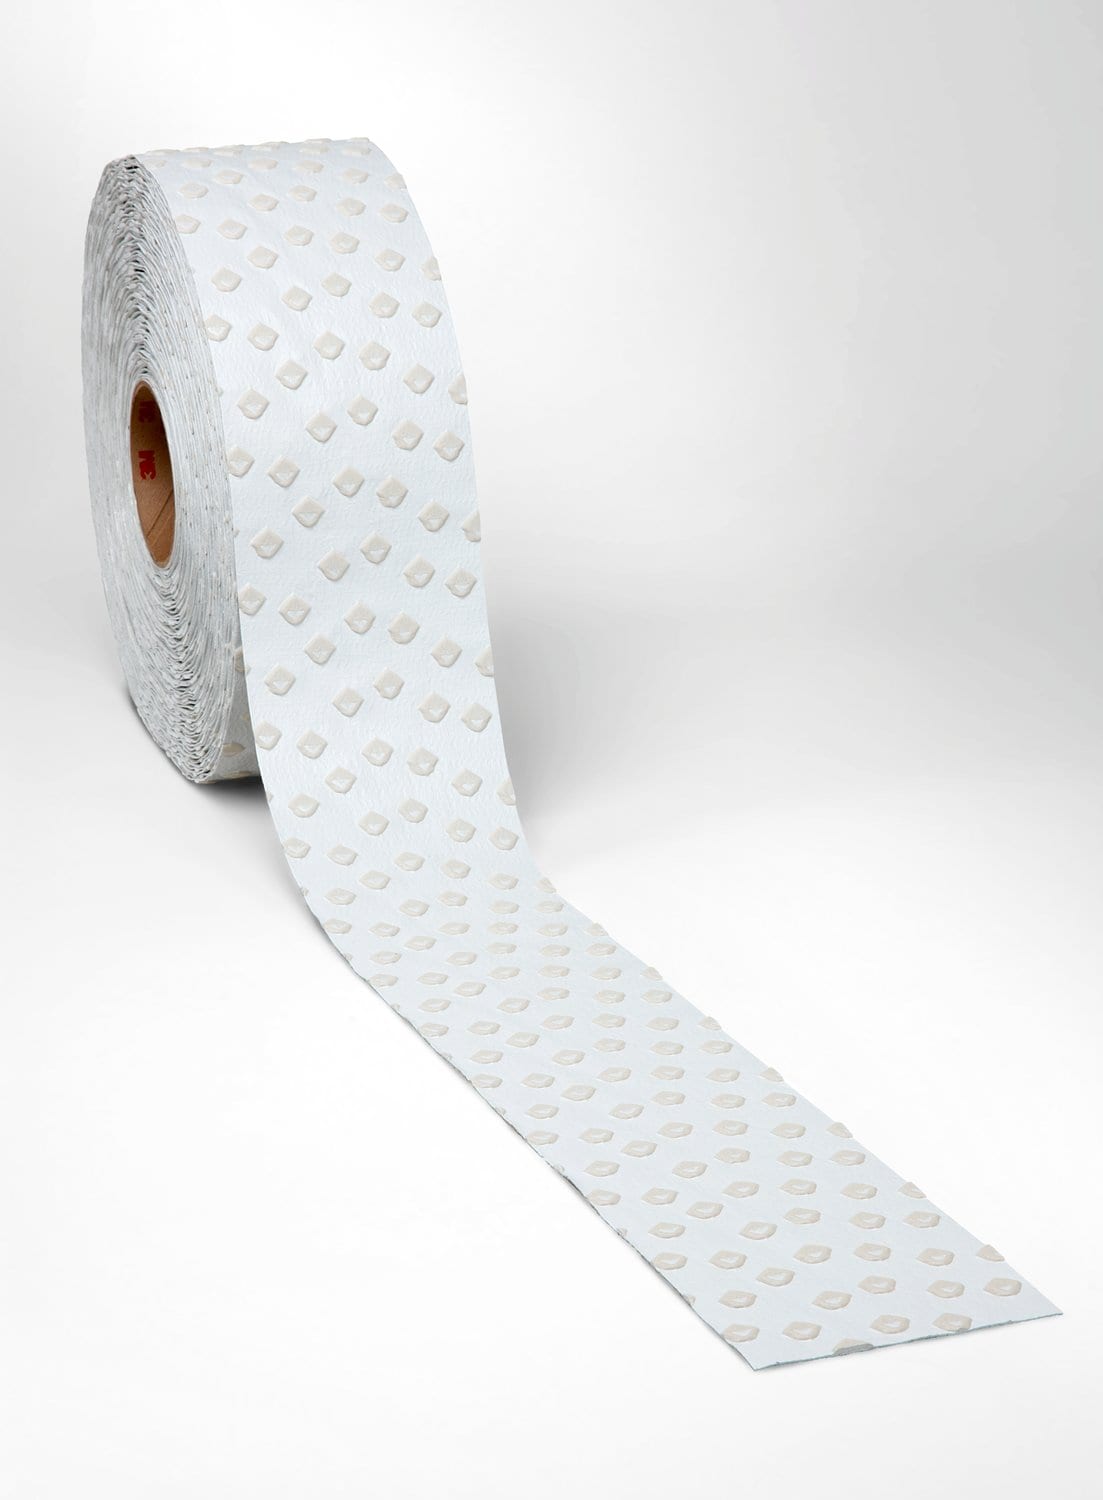 7100314699 - 3M Stamark Removable Pavement Marking Tape A710IR, White, 5 in x 120 yd 1 Rol/CV